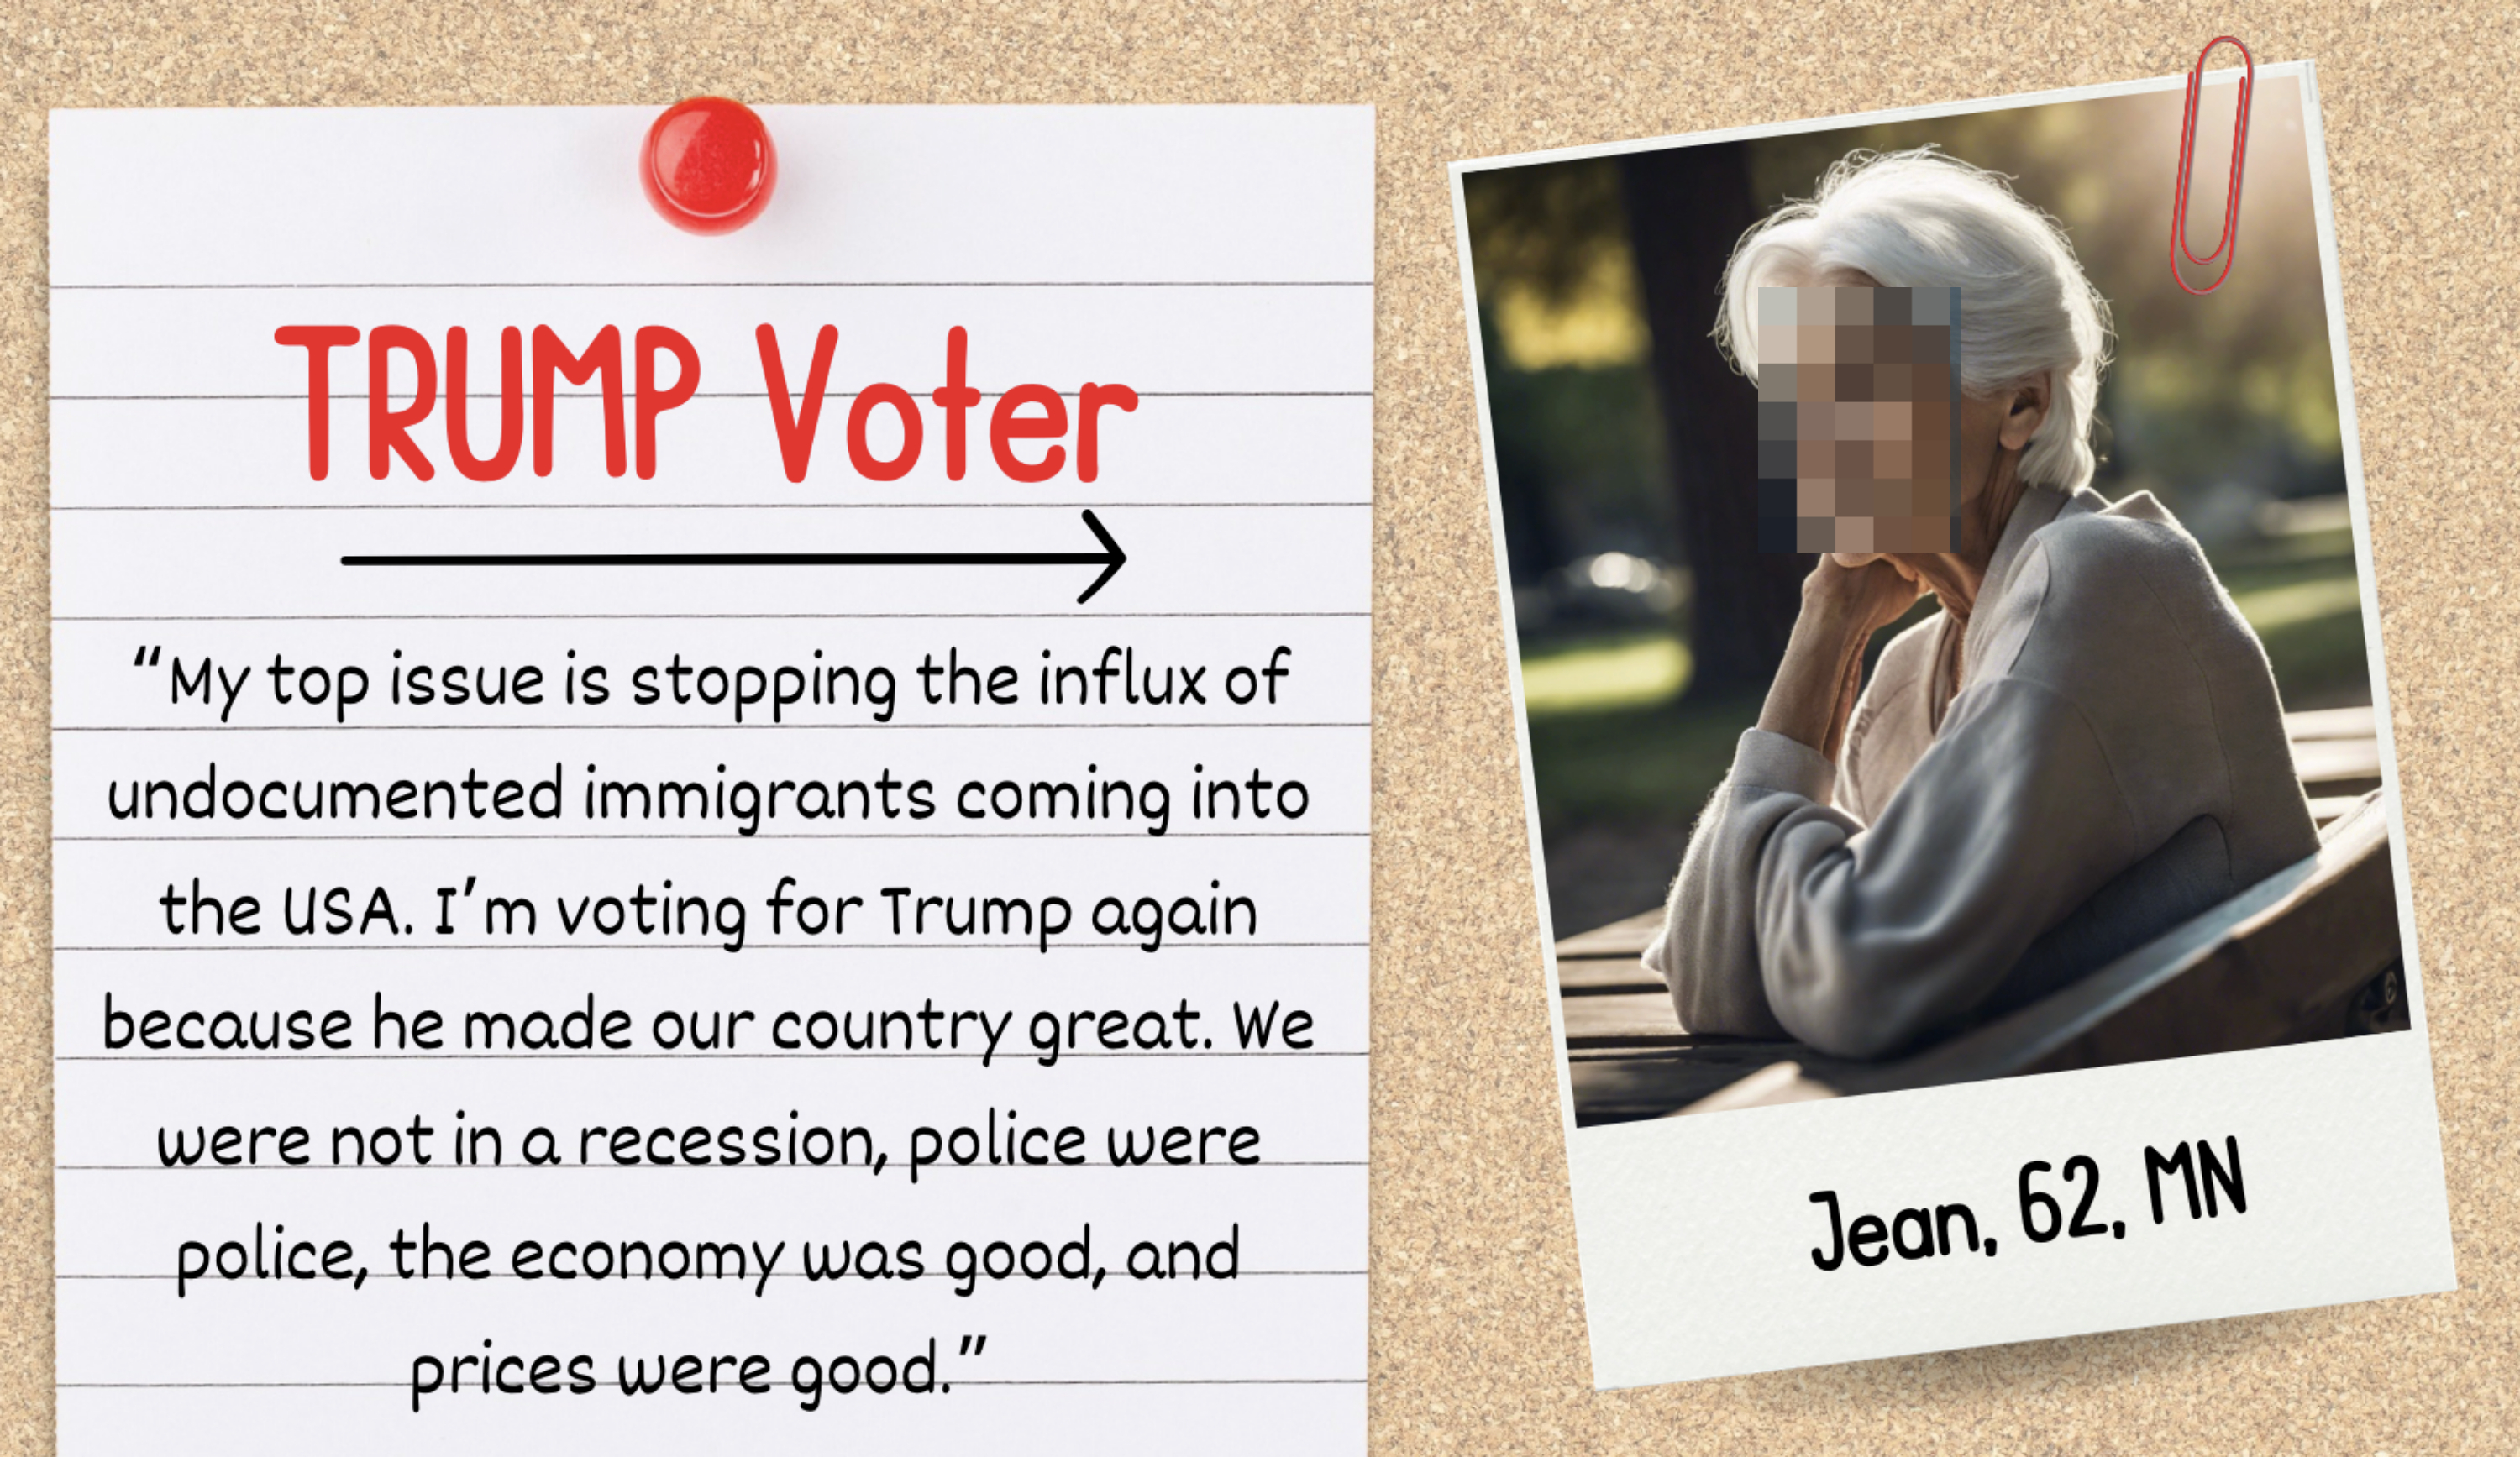 Note summarizing voter&#x27;s stance with &quot;TRUMP Voter&quot; headline; Elderly woman named Jean, 62, from MN appears contemplative